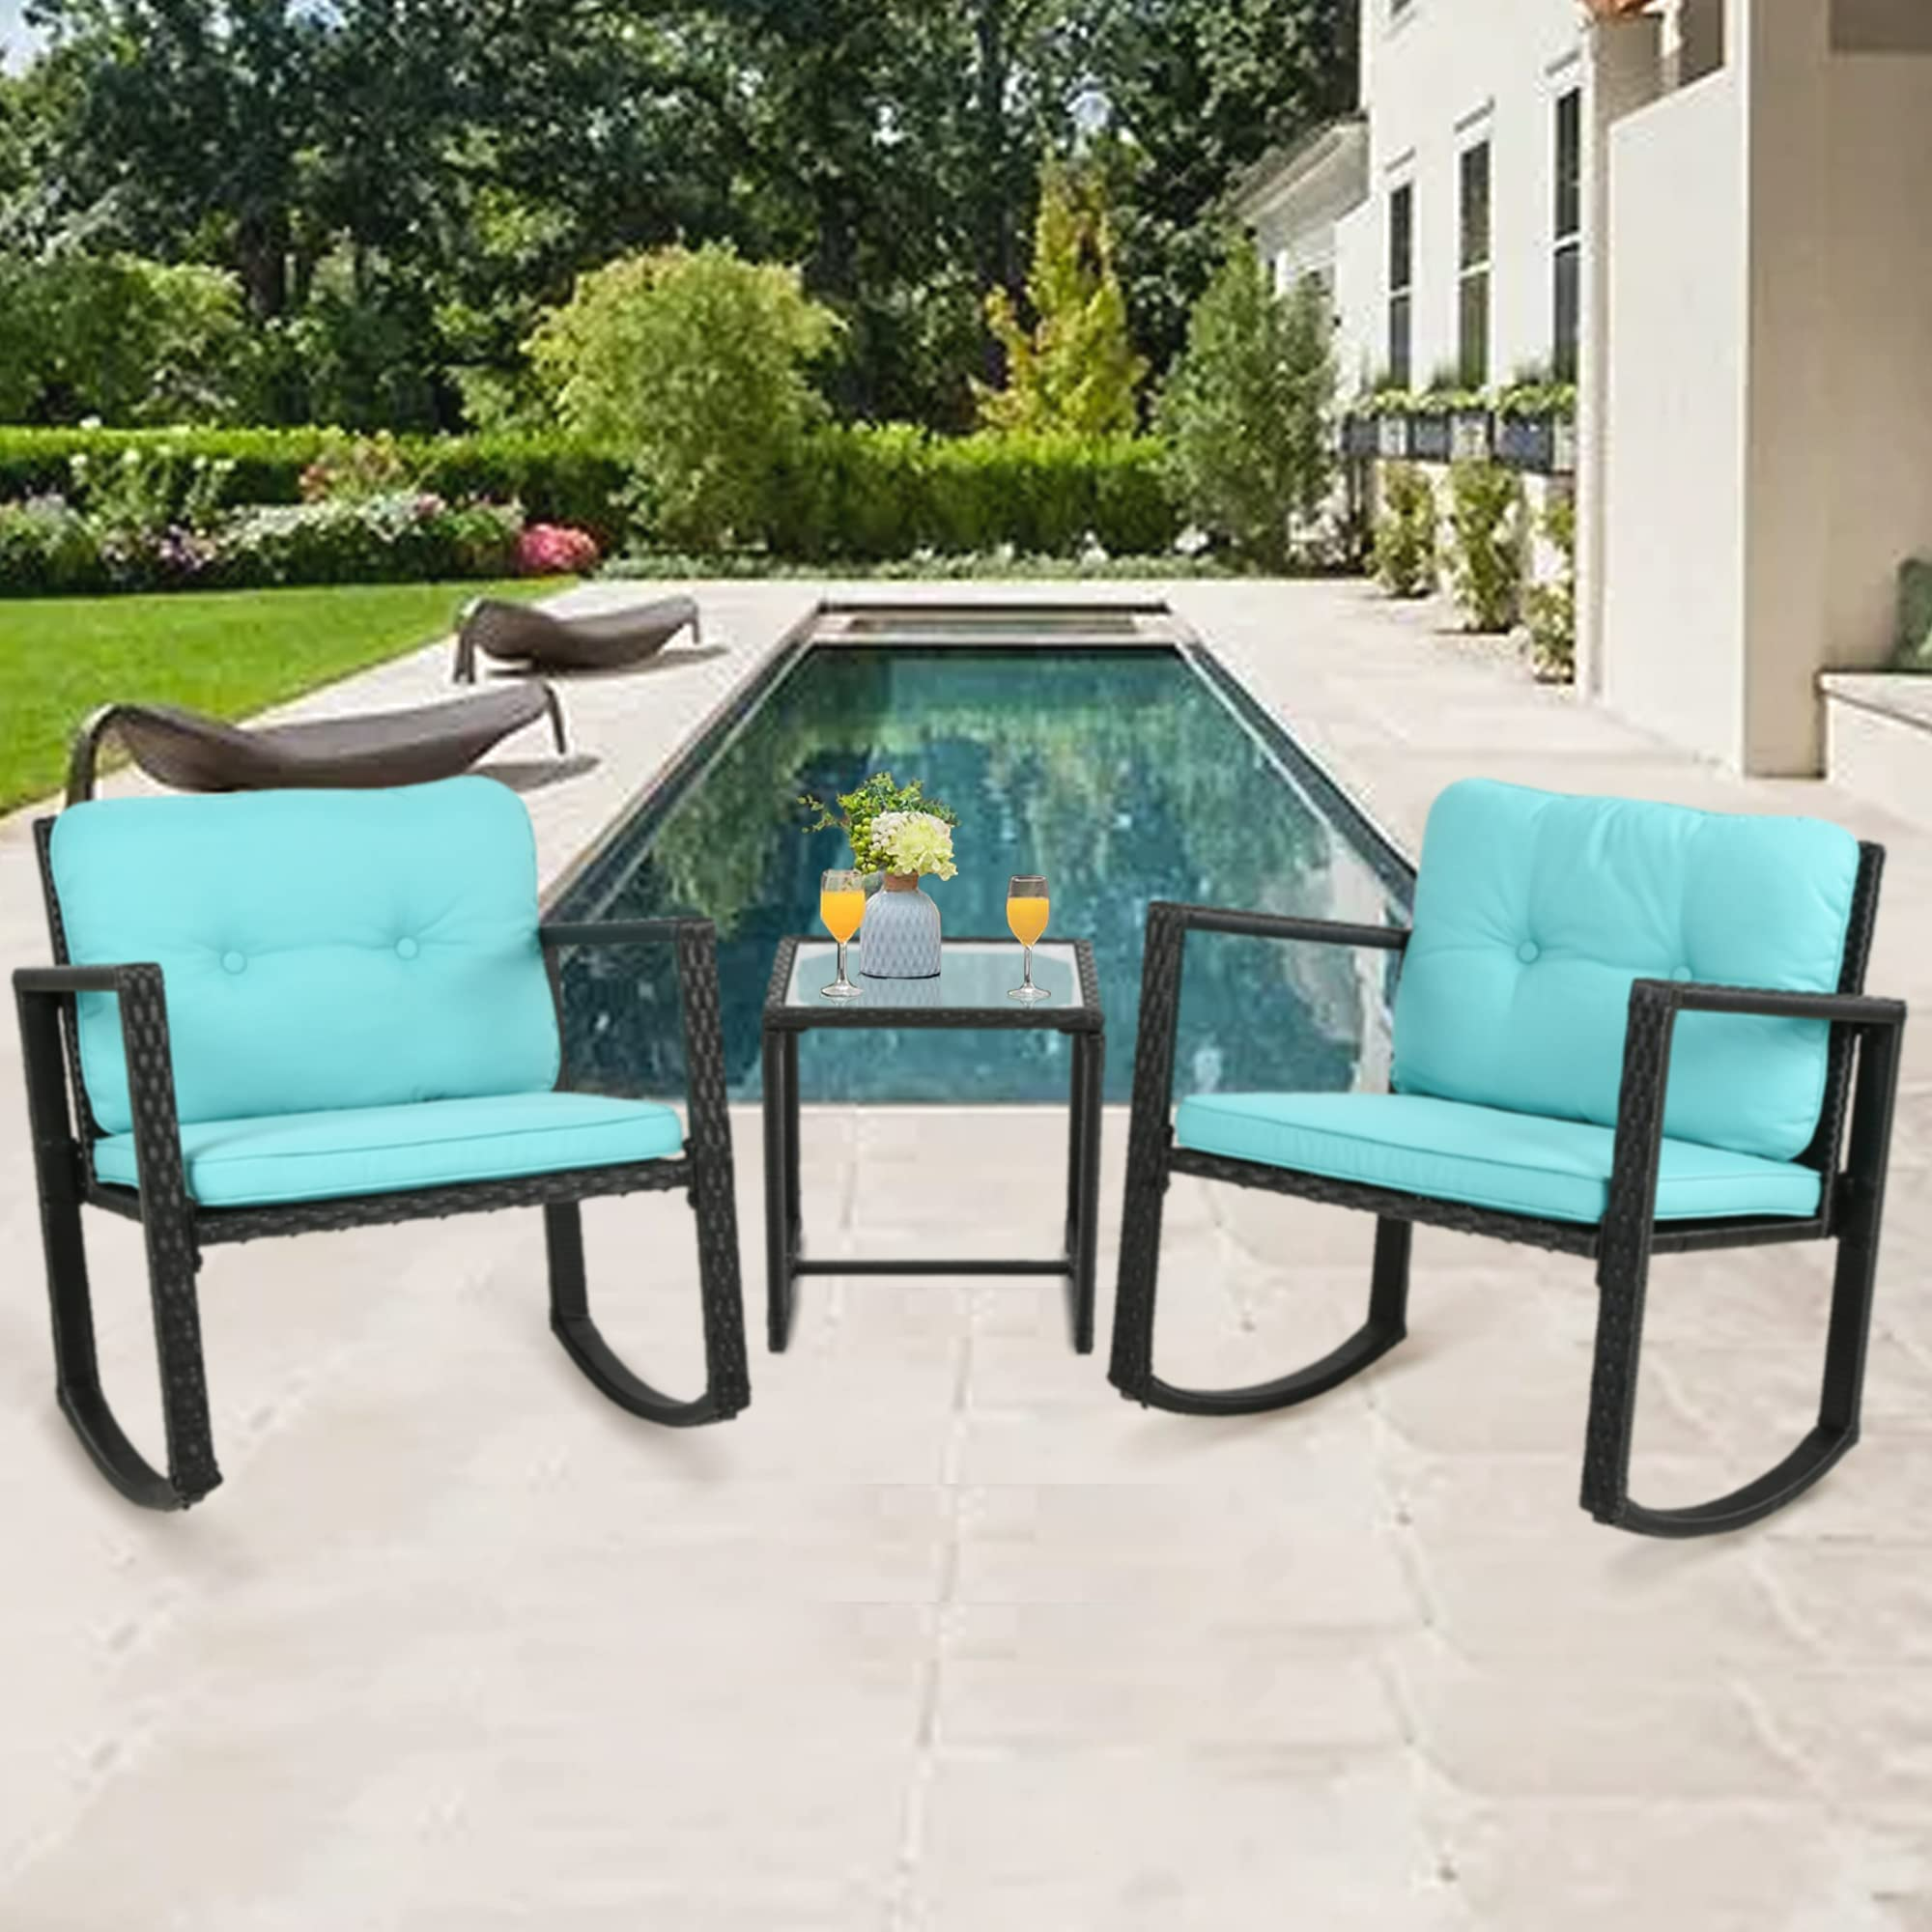 3-Piece Rocking Bistro Set Outdoor Rattan Wicker Chair with Thickened Cushion & Glass Coffee Table,Modern Wicker Patio Furniture Garden Porch Conversation Sets for Porch Lawn, Blue - image 1 of 7